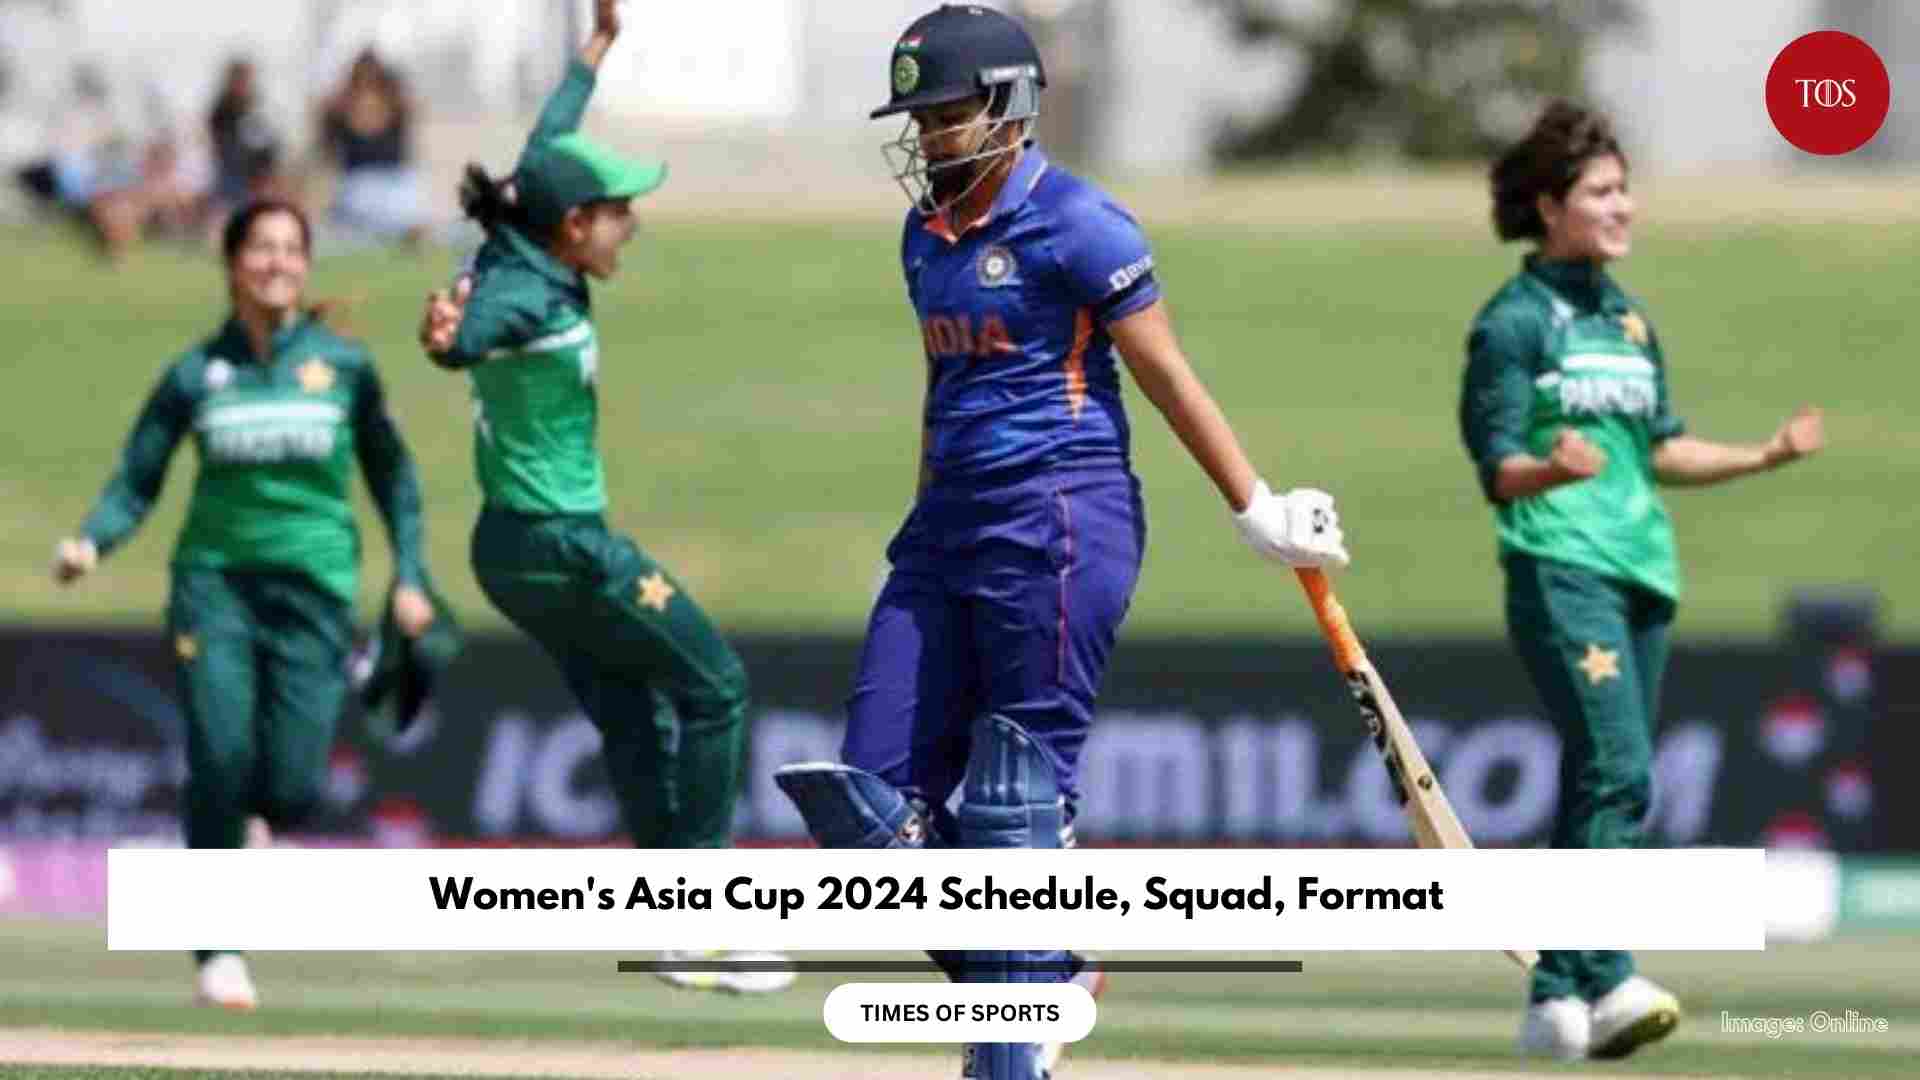 Women's Asia Cup 2024 Schedule, Squad, Format